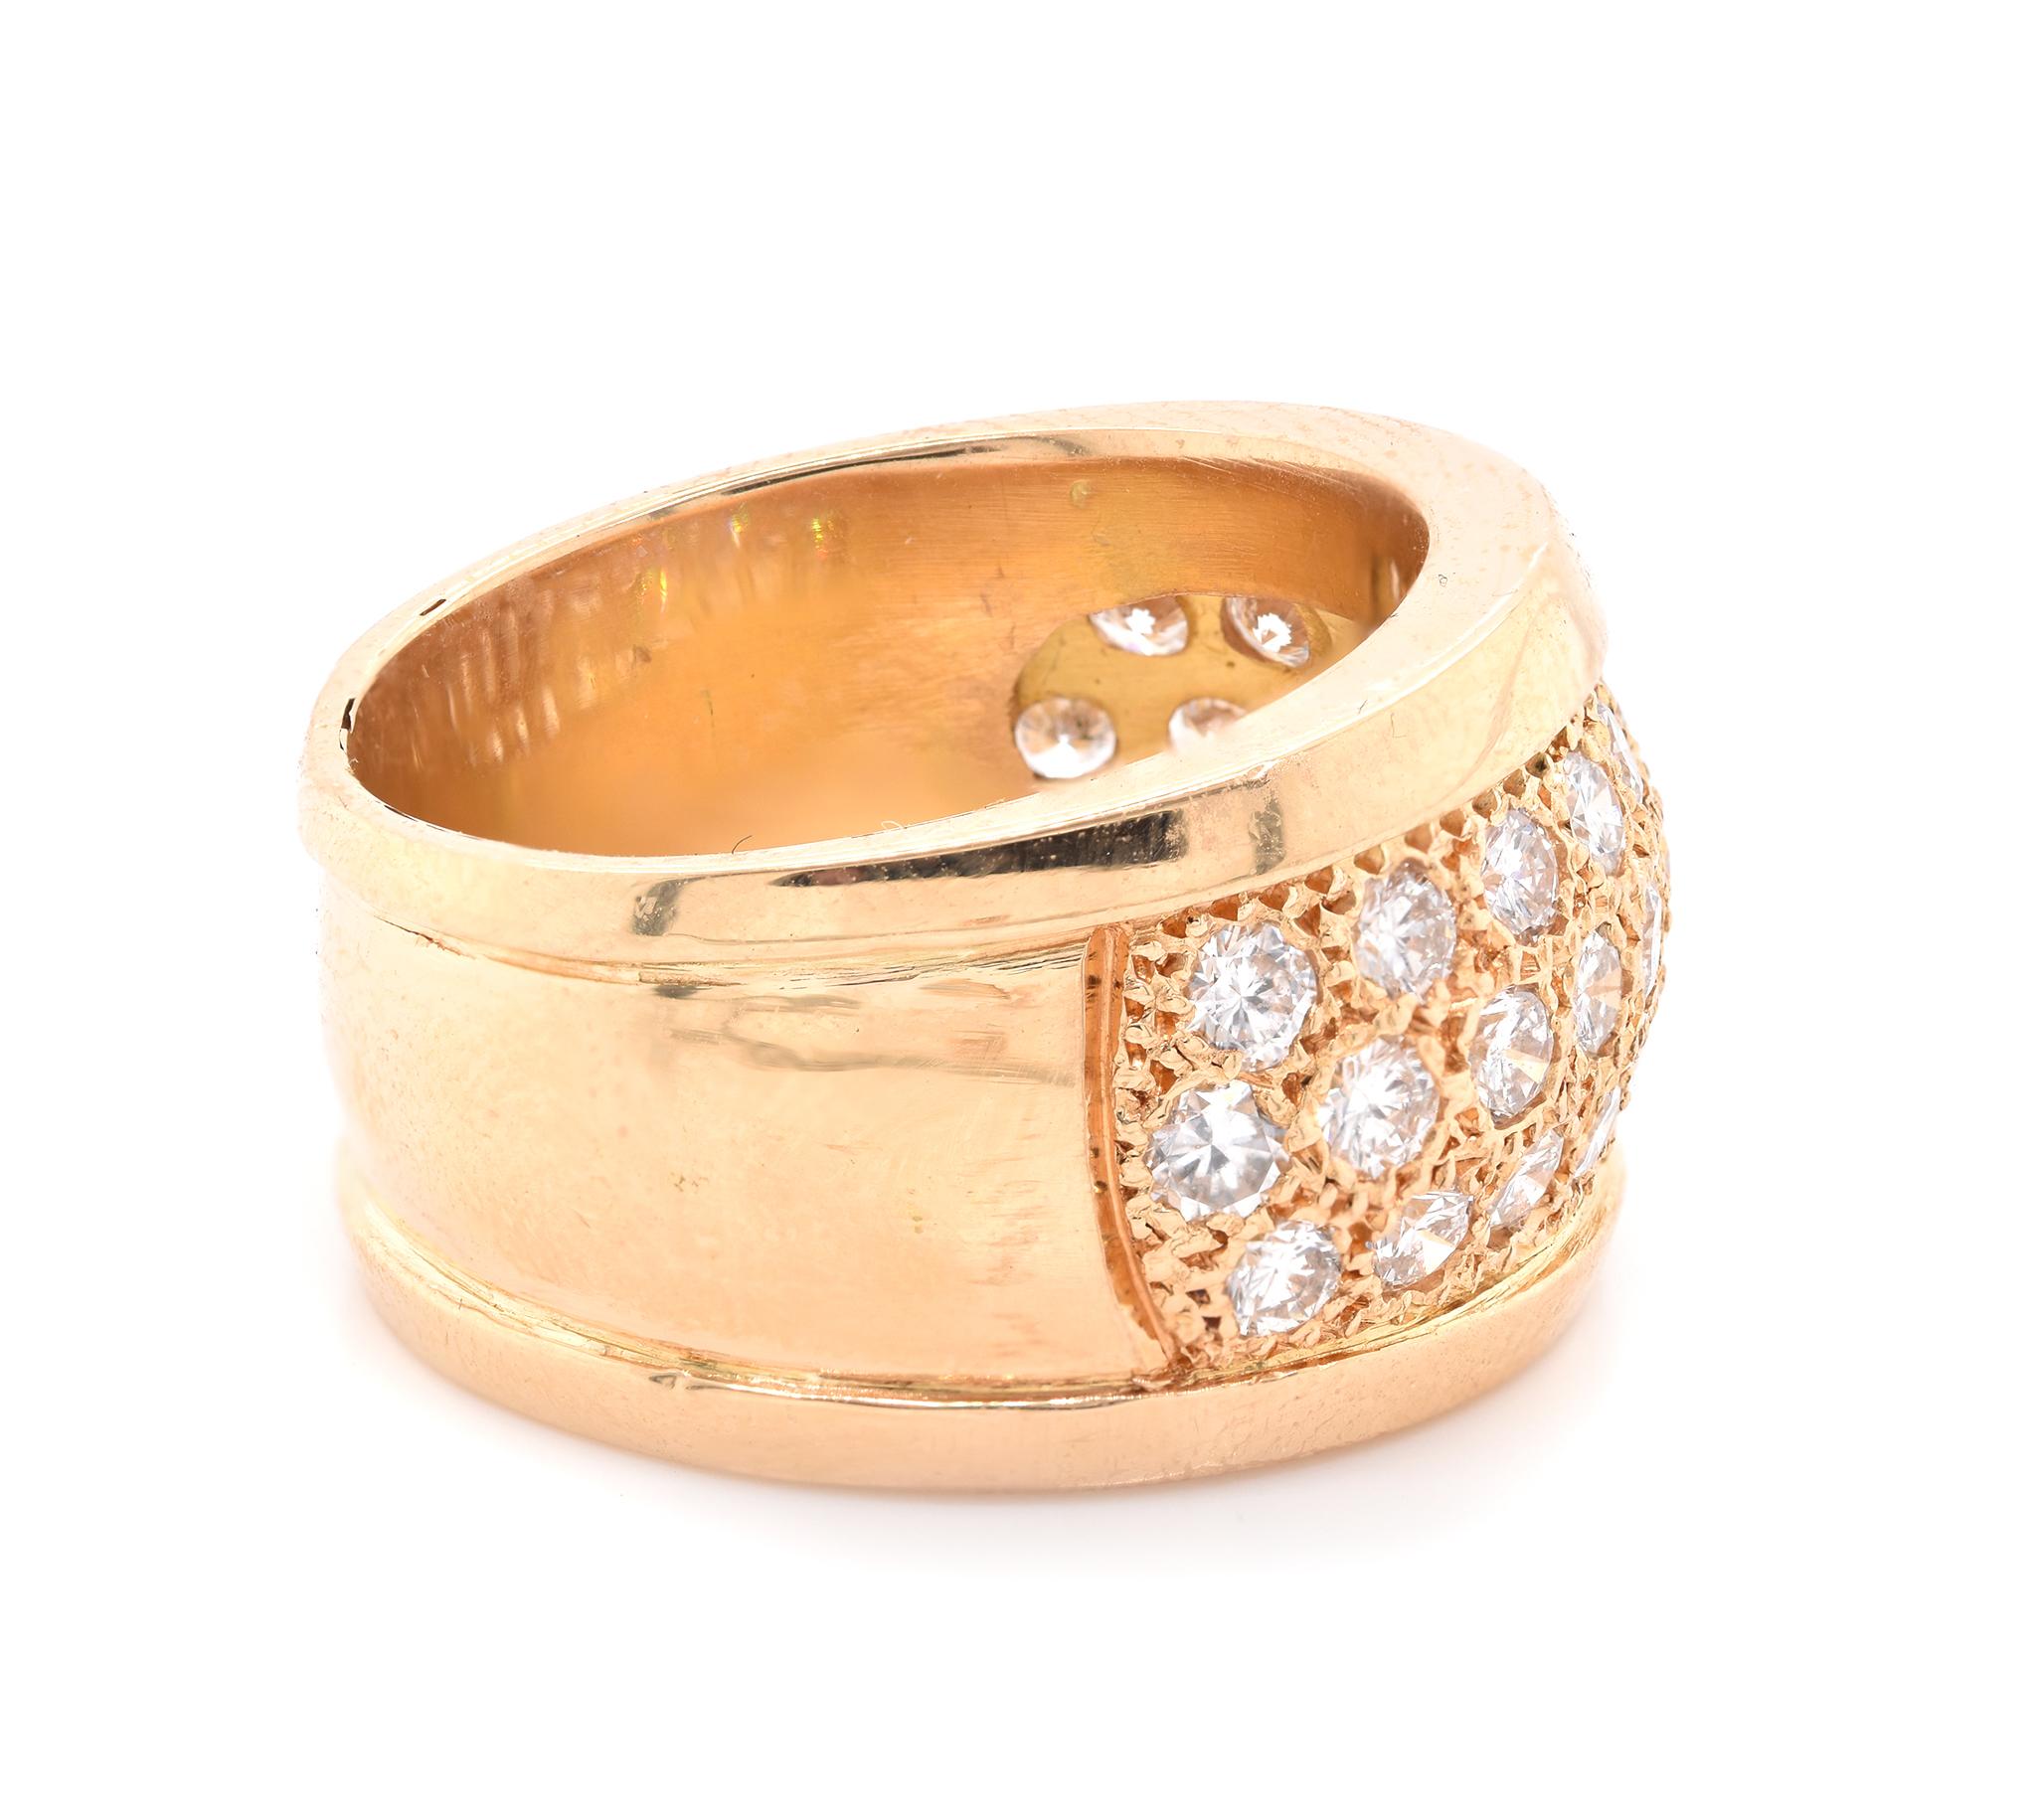 Designer: custom designed 
Material: 14K yellow gold
Diamonds: 31 round brilliant cut = 1.24cttw
Color: G
Clarity: SI1
Size: 7.5 (please allow two additional shipping days for sizing requests)
Dimensions: top measures 13.9mm wide
Weight: 14.42 grams
